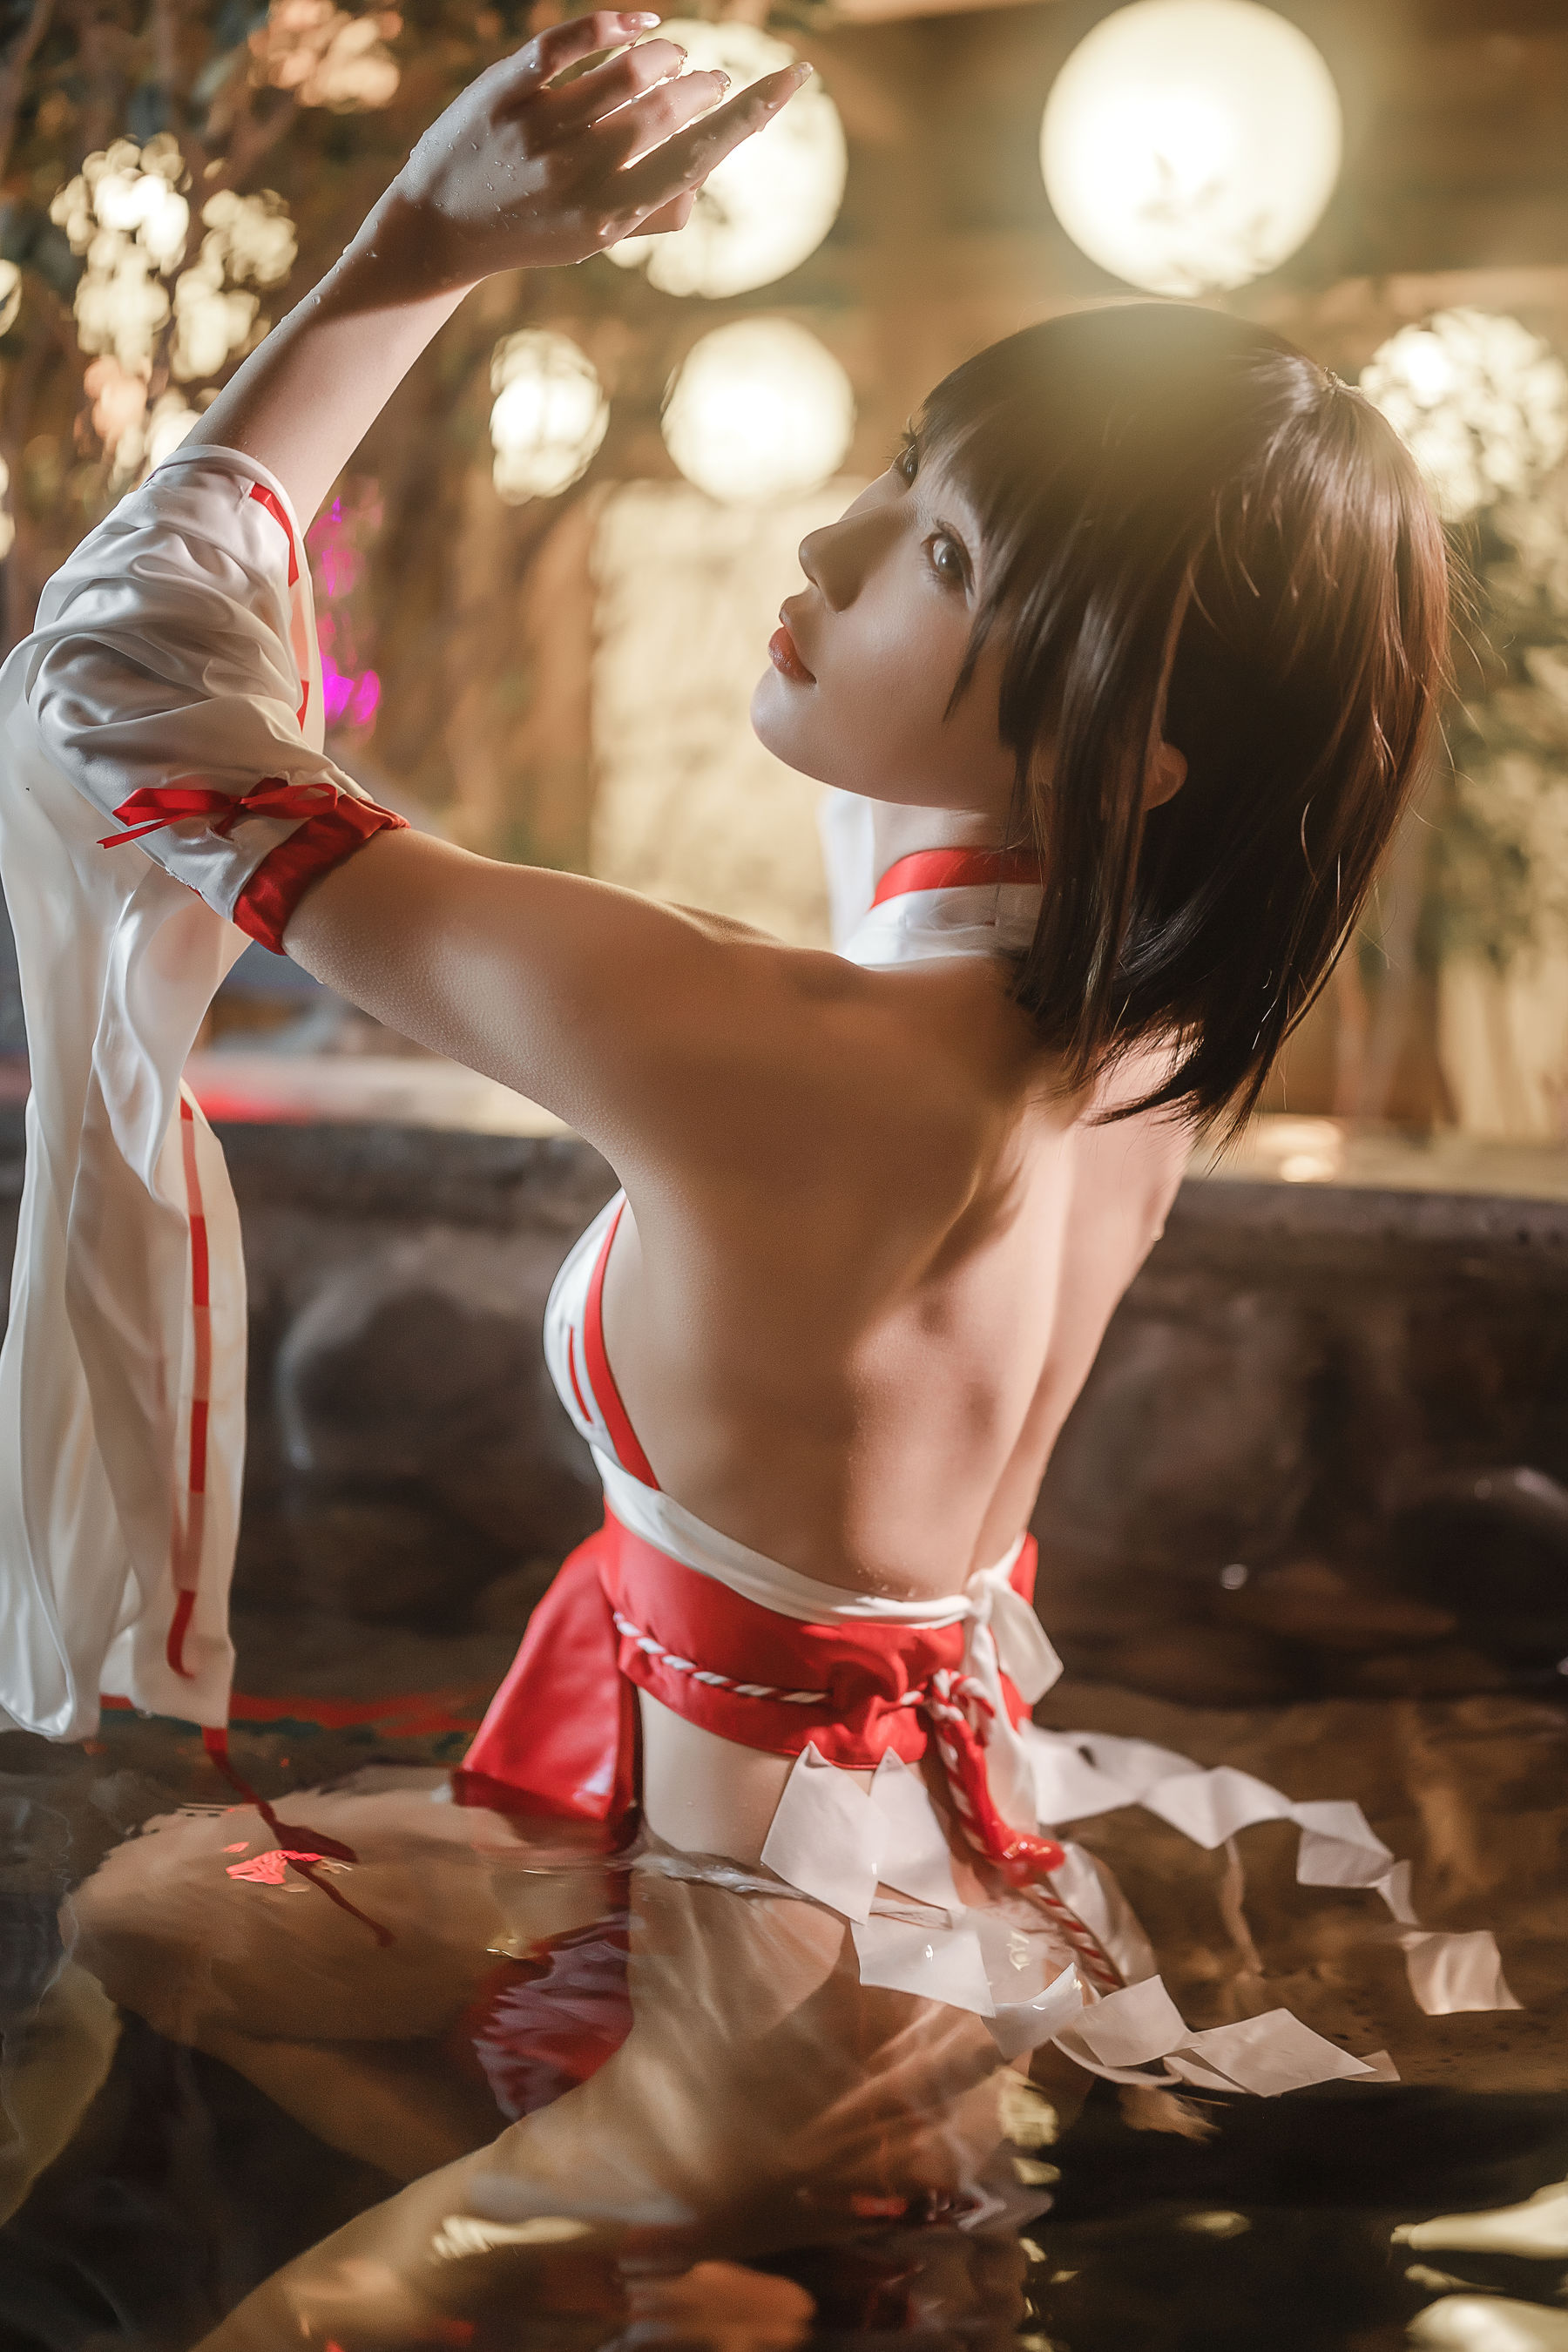 [Net Red COSER Photo] Anime blogger A Bao is also a rabbit girl - Hot Spring Miko Page 1 No.2dbae6